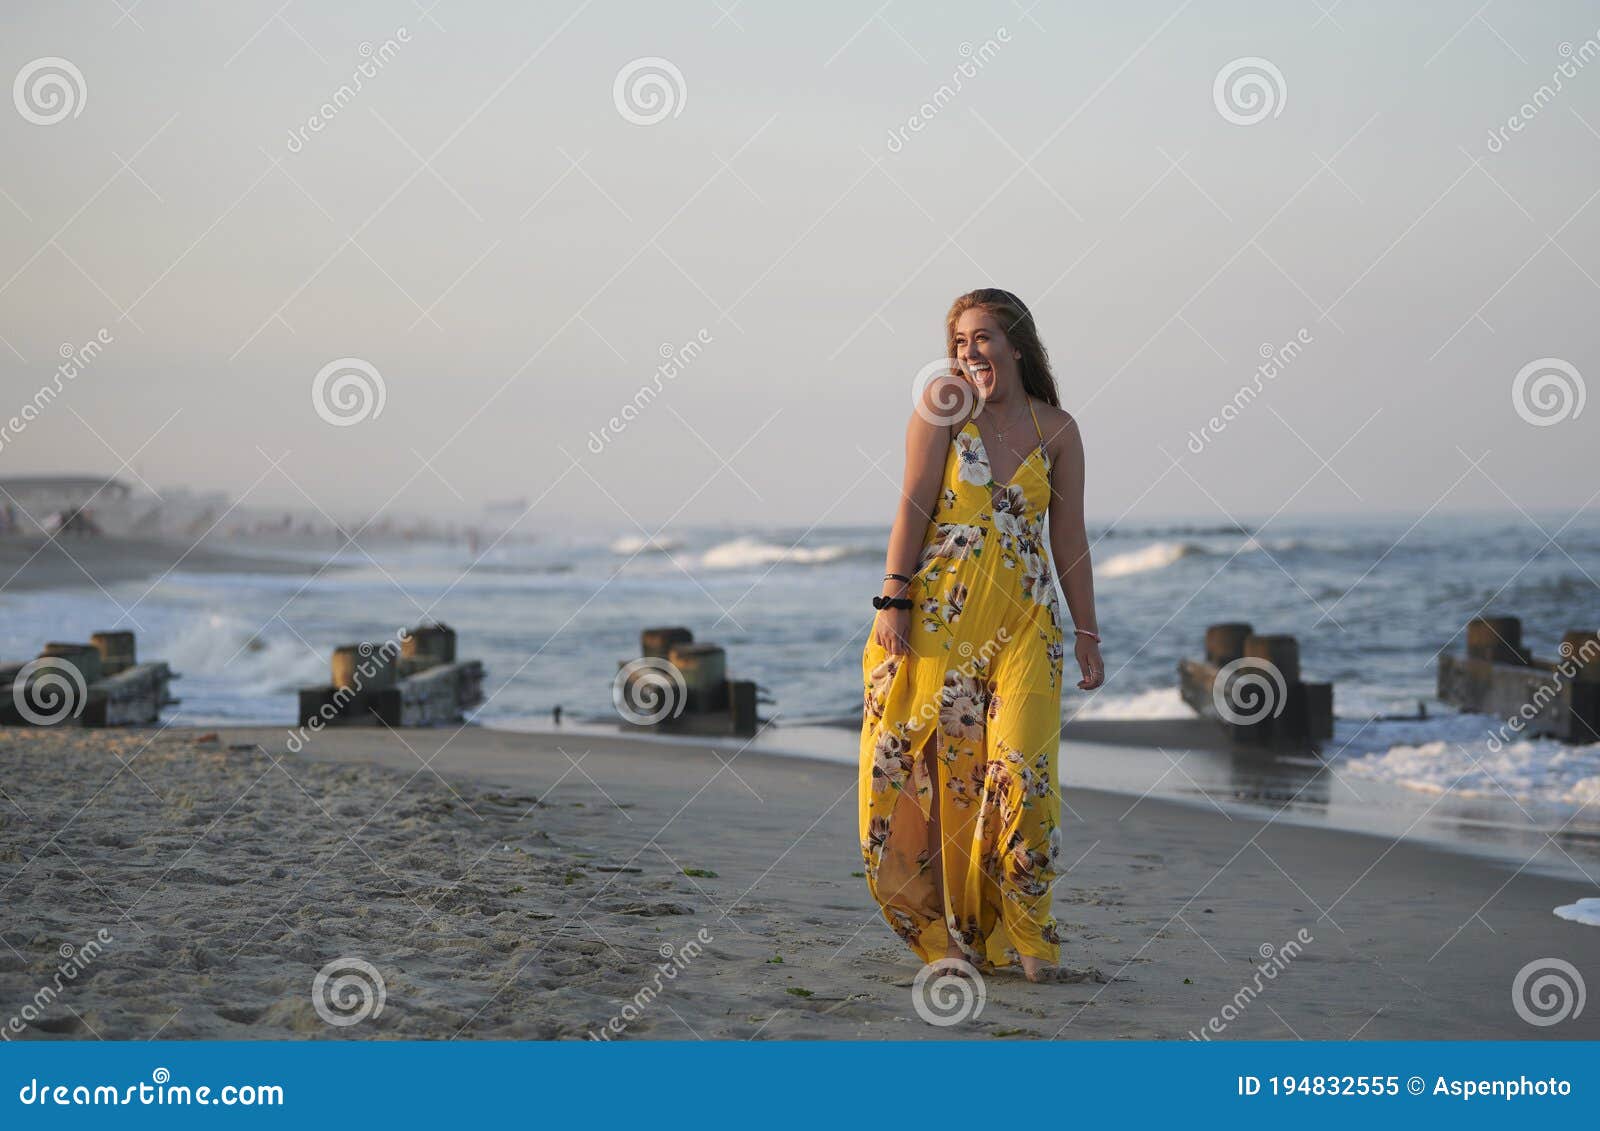 Cute Young Woman in Stunning Yellow Dress at Beach Stock Image - Image ...